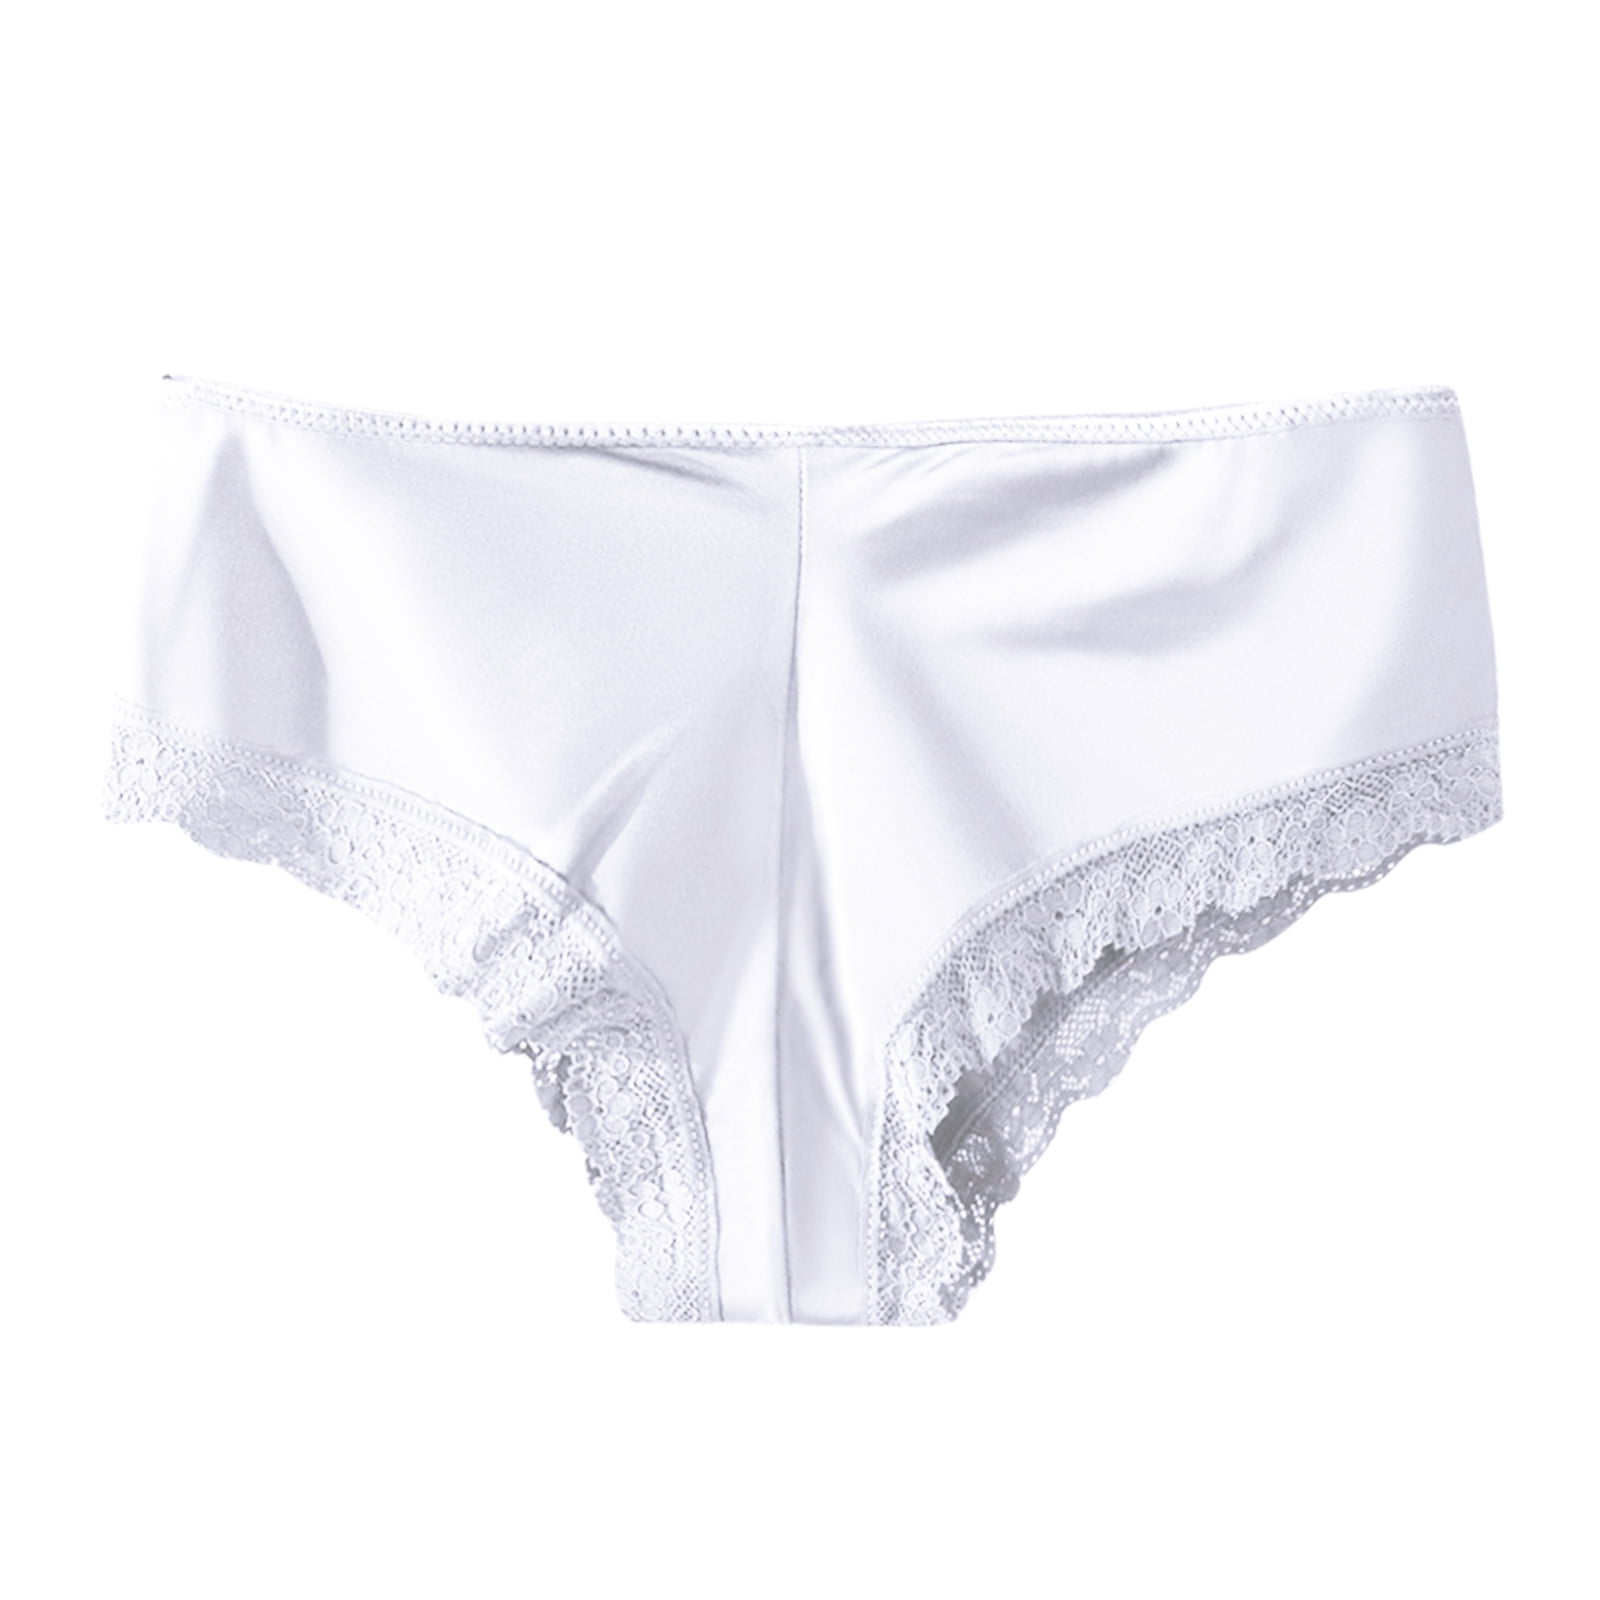 Tummy Control Underwear Cotton Lace Soft Stretch Full Cheeky Hipster White L